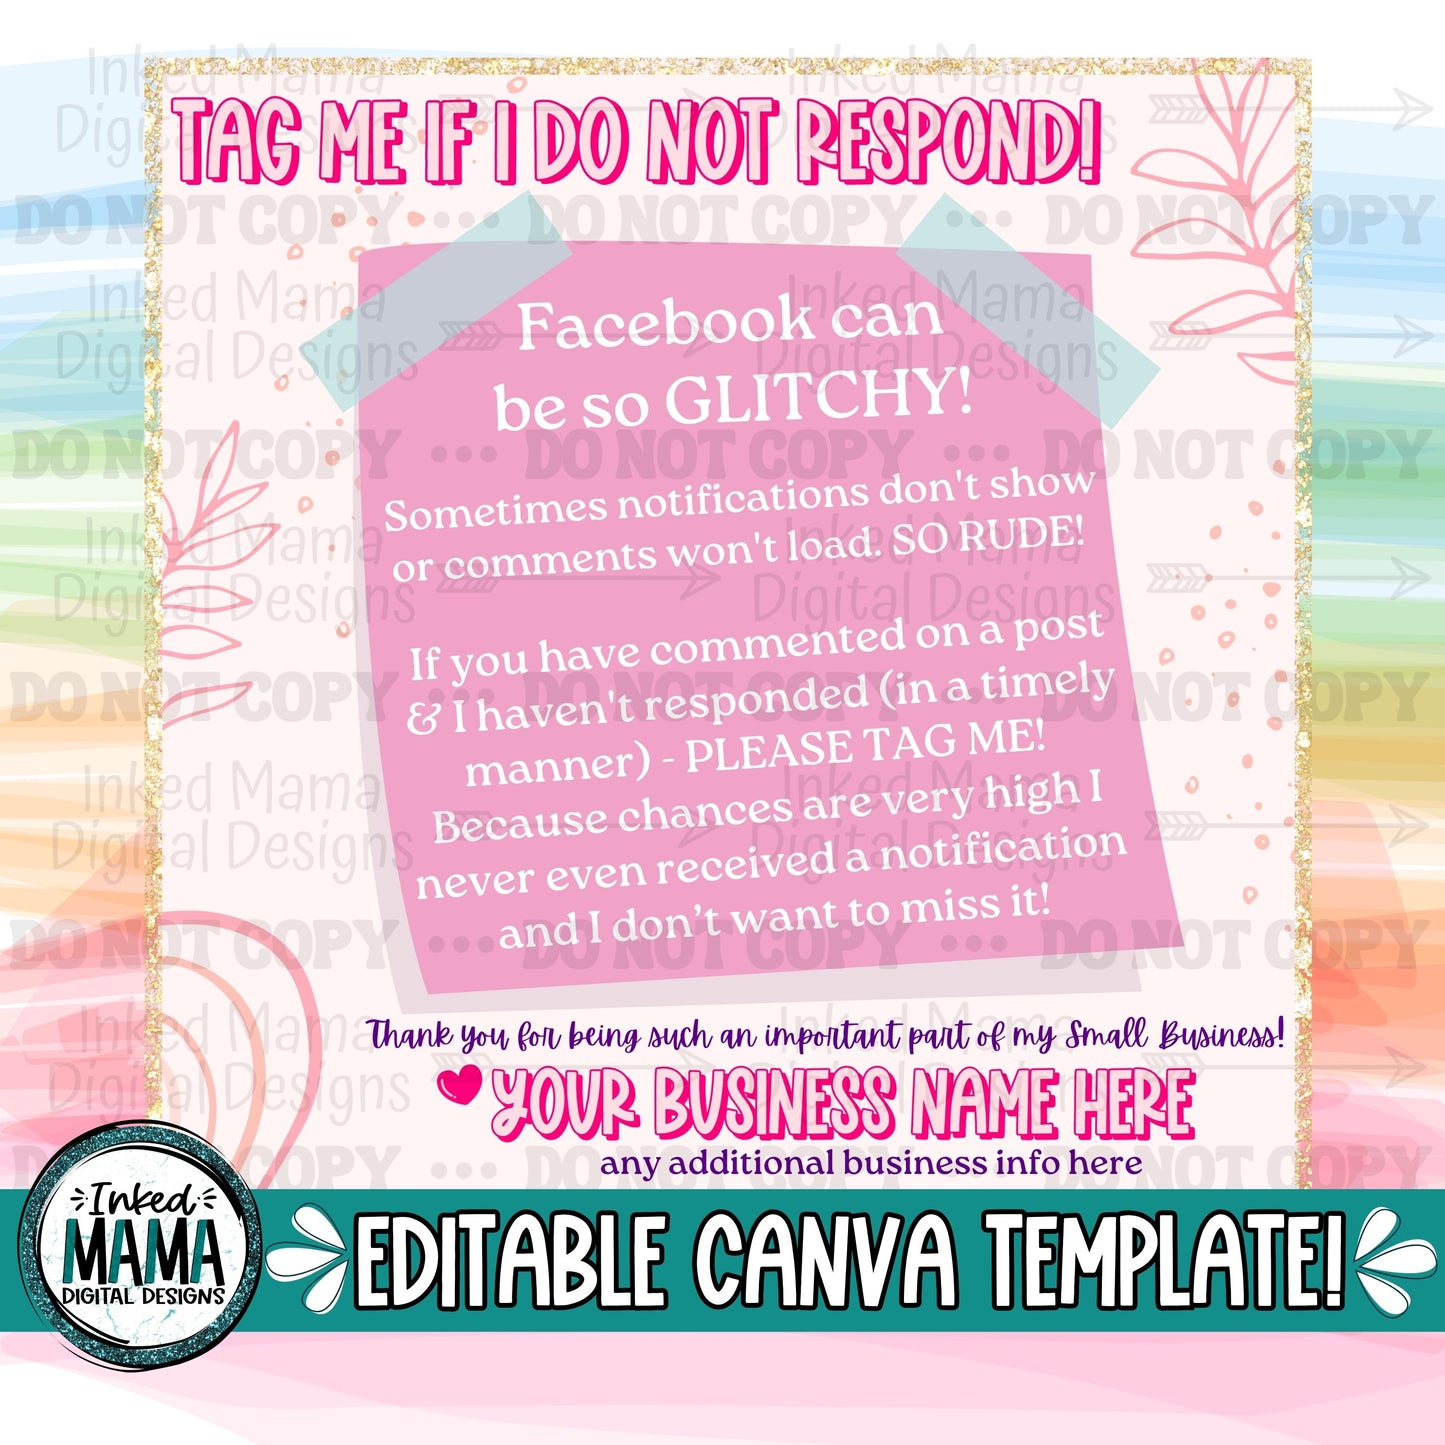 Tag Me Small Business Graphic | Editable Canva Template